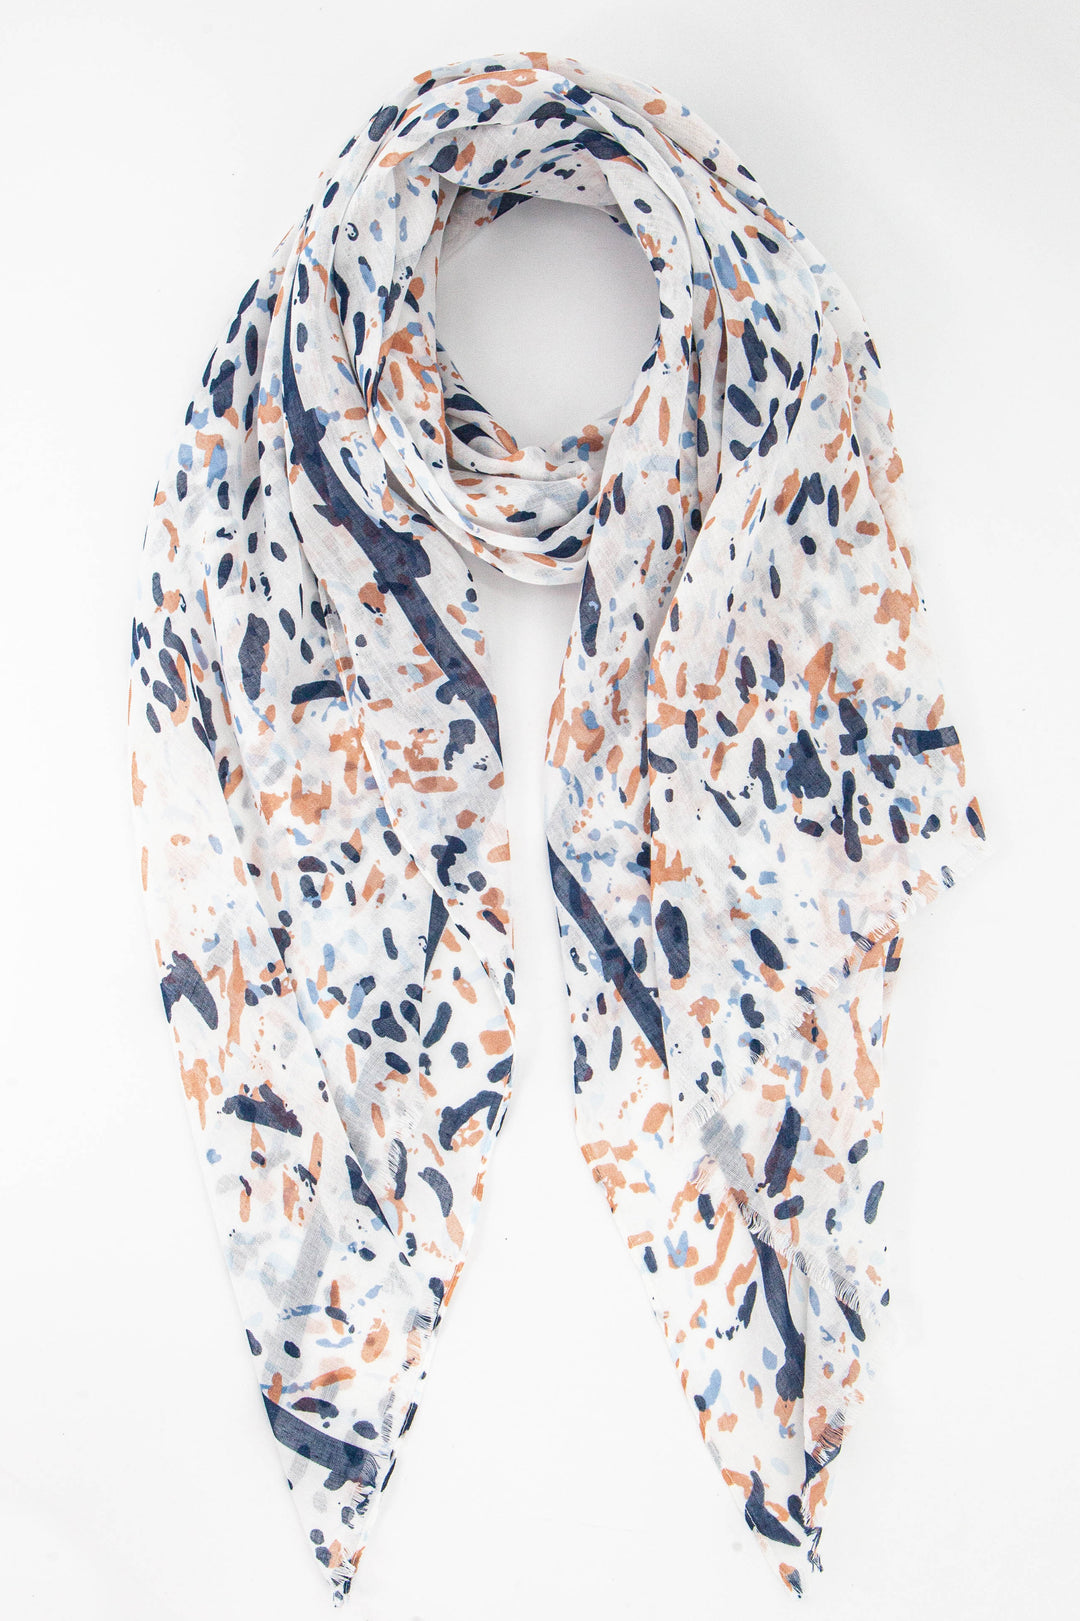 abstract animal spot print scarf in cream and navy blue with an all over pattern and a thin navy blue lined border